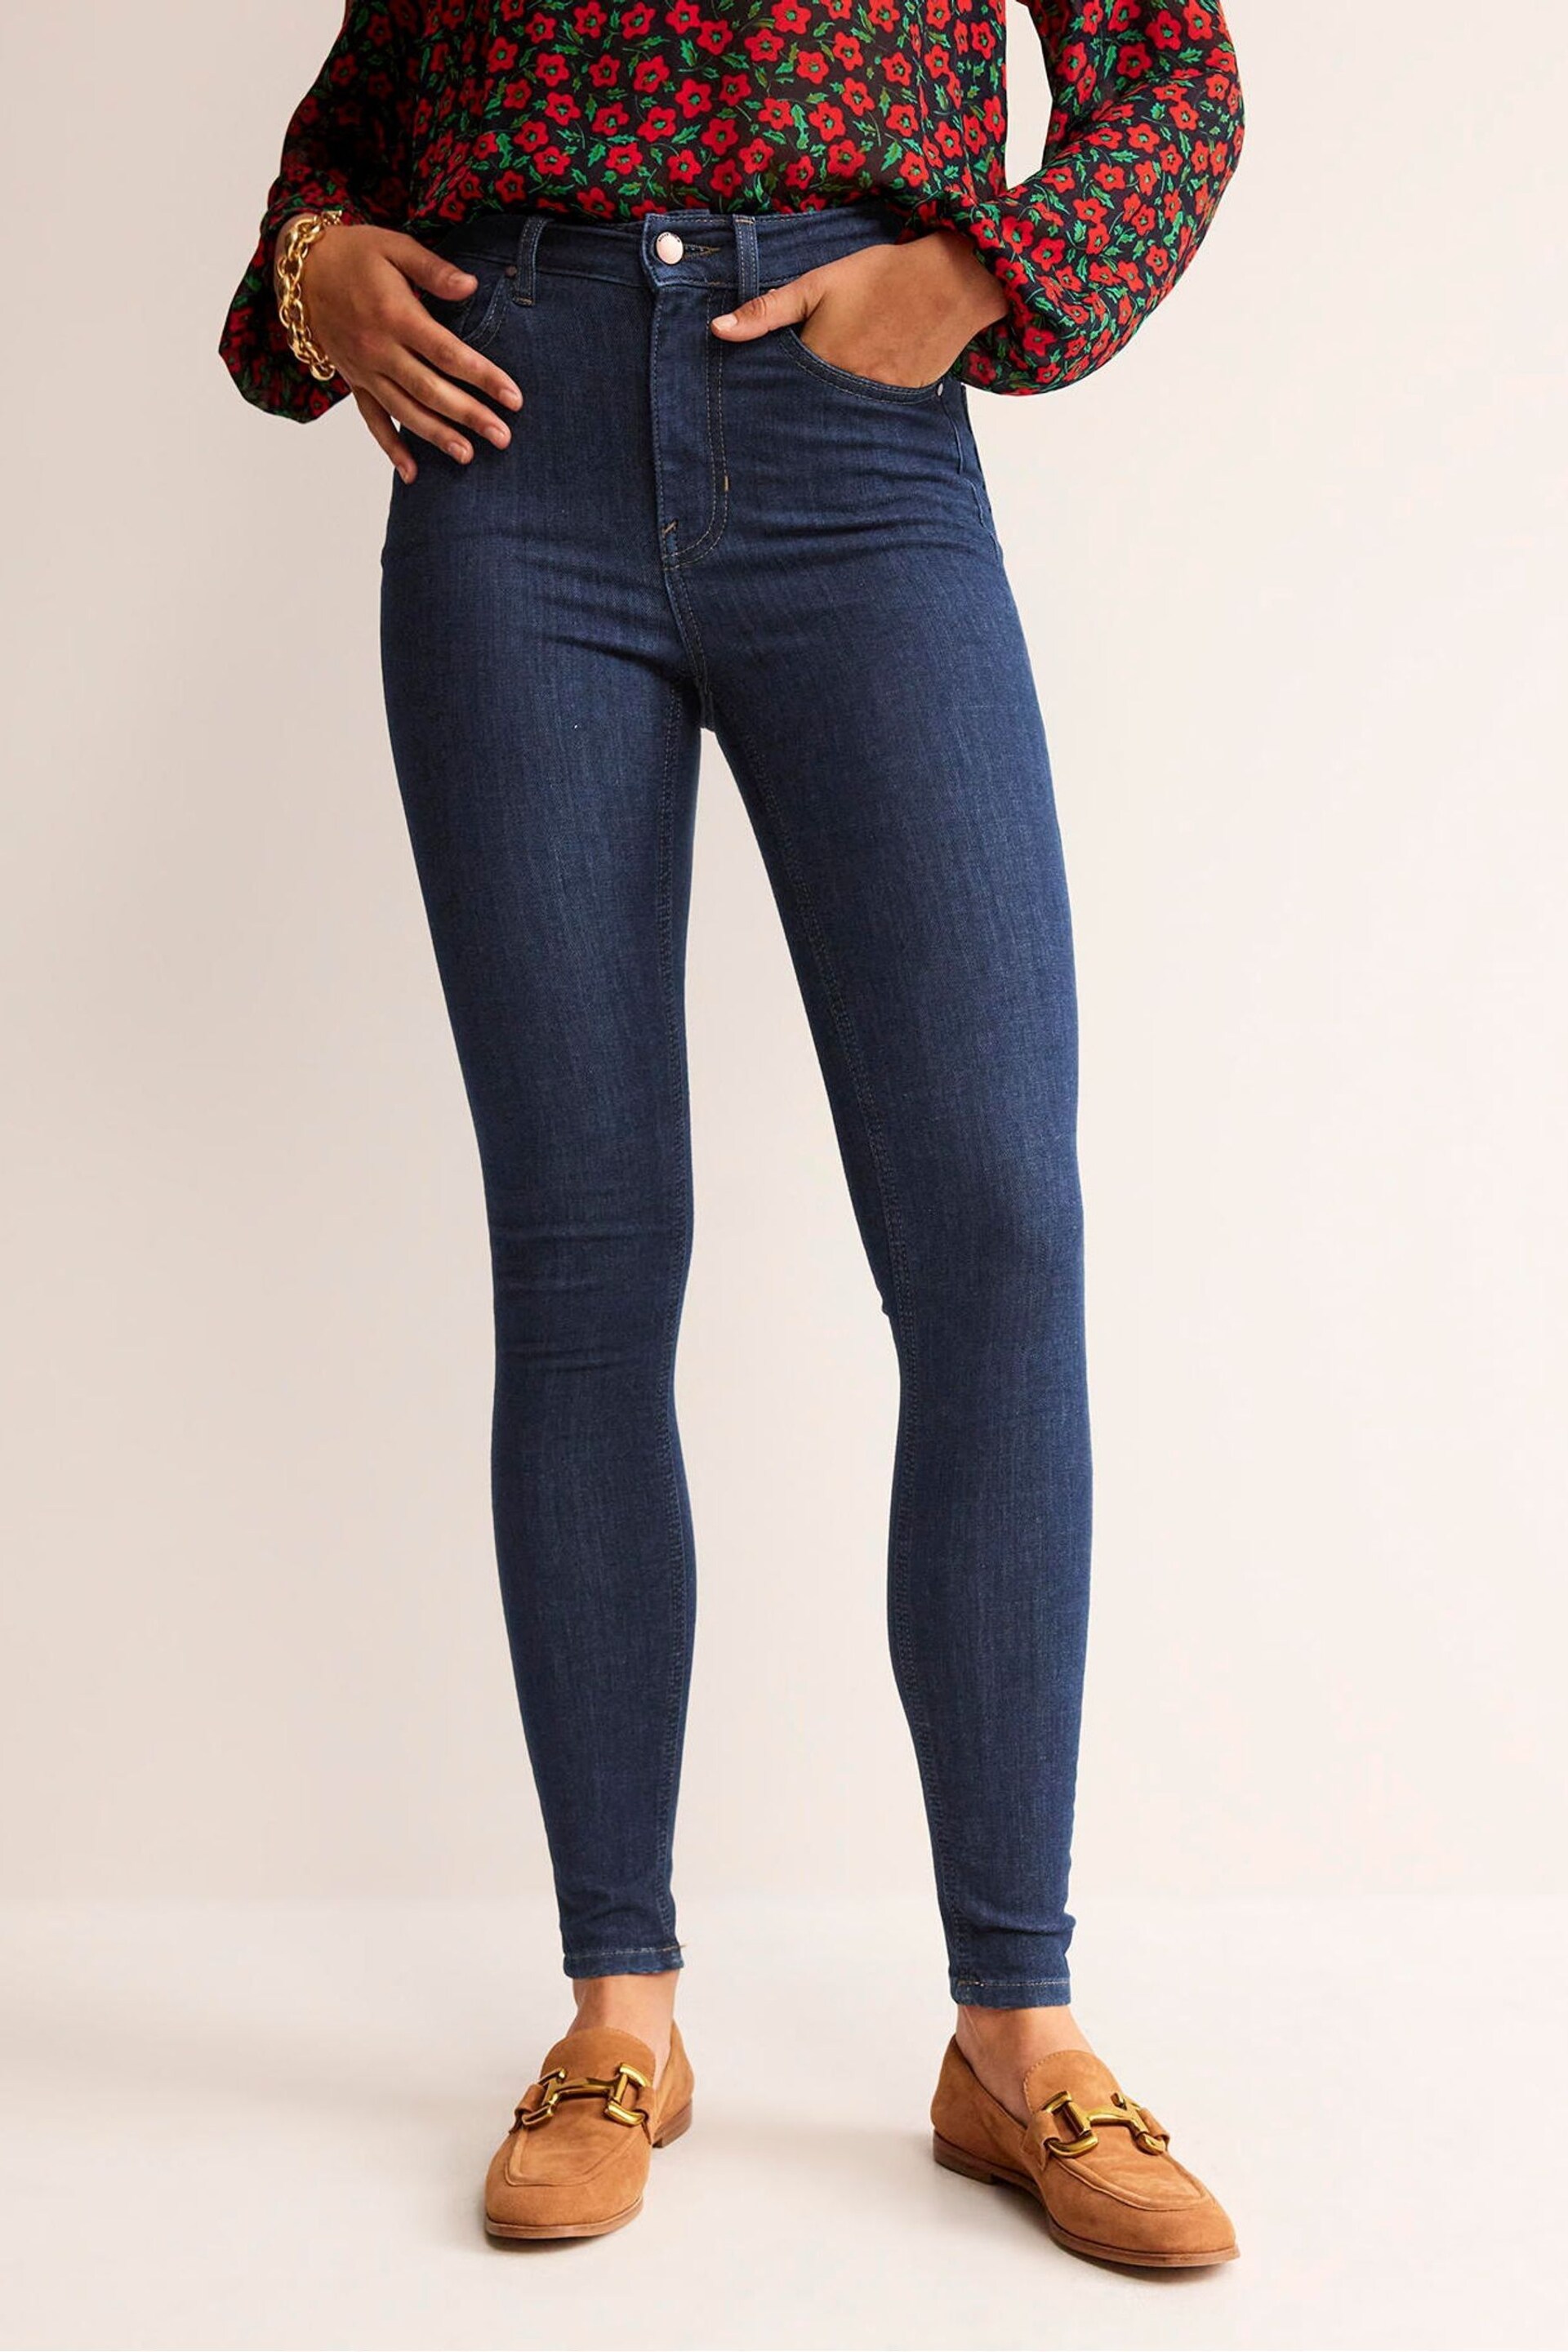 Boden Blue Comfort Stretch Jeans - Image 1 of 6